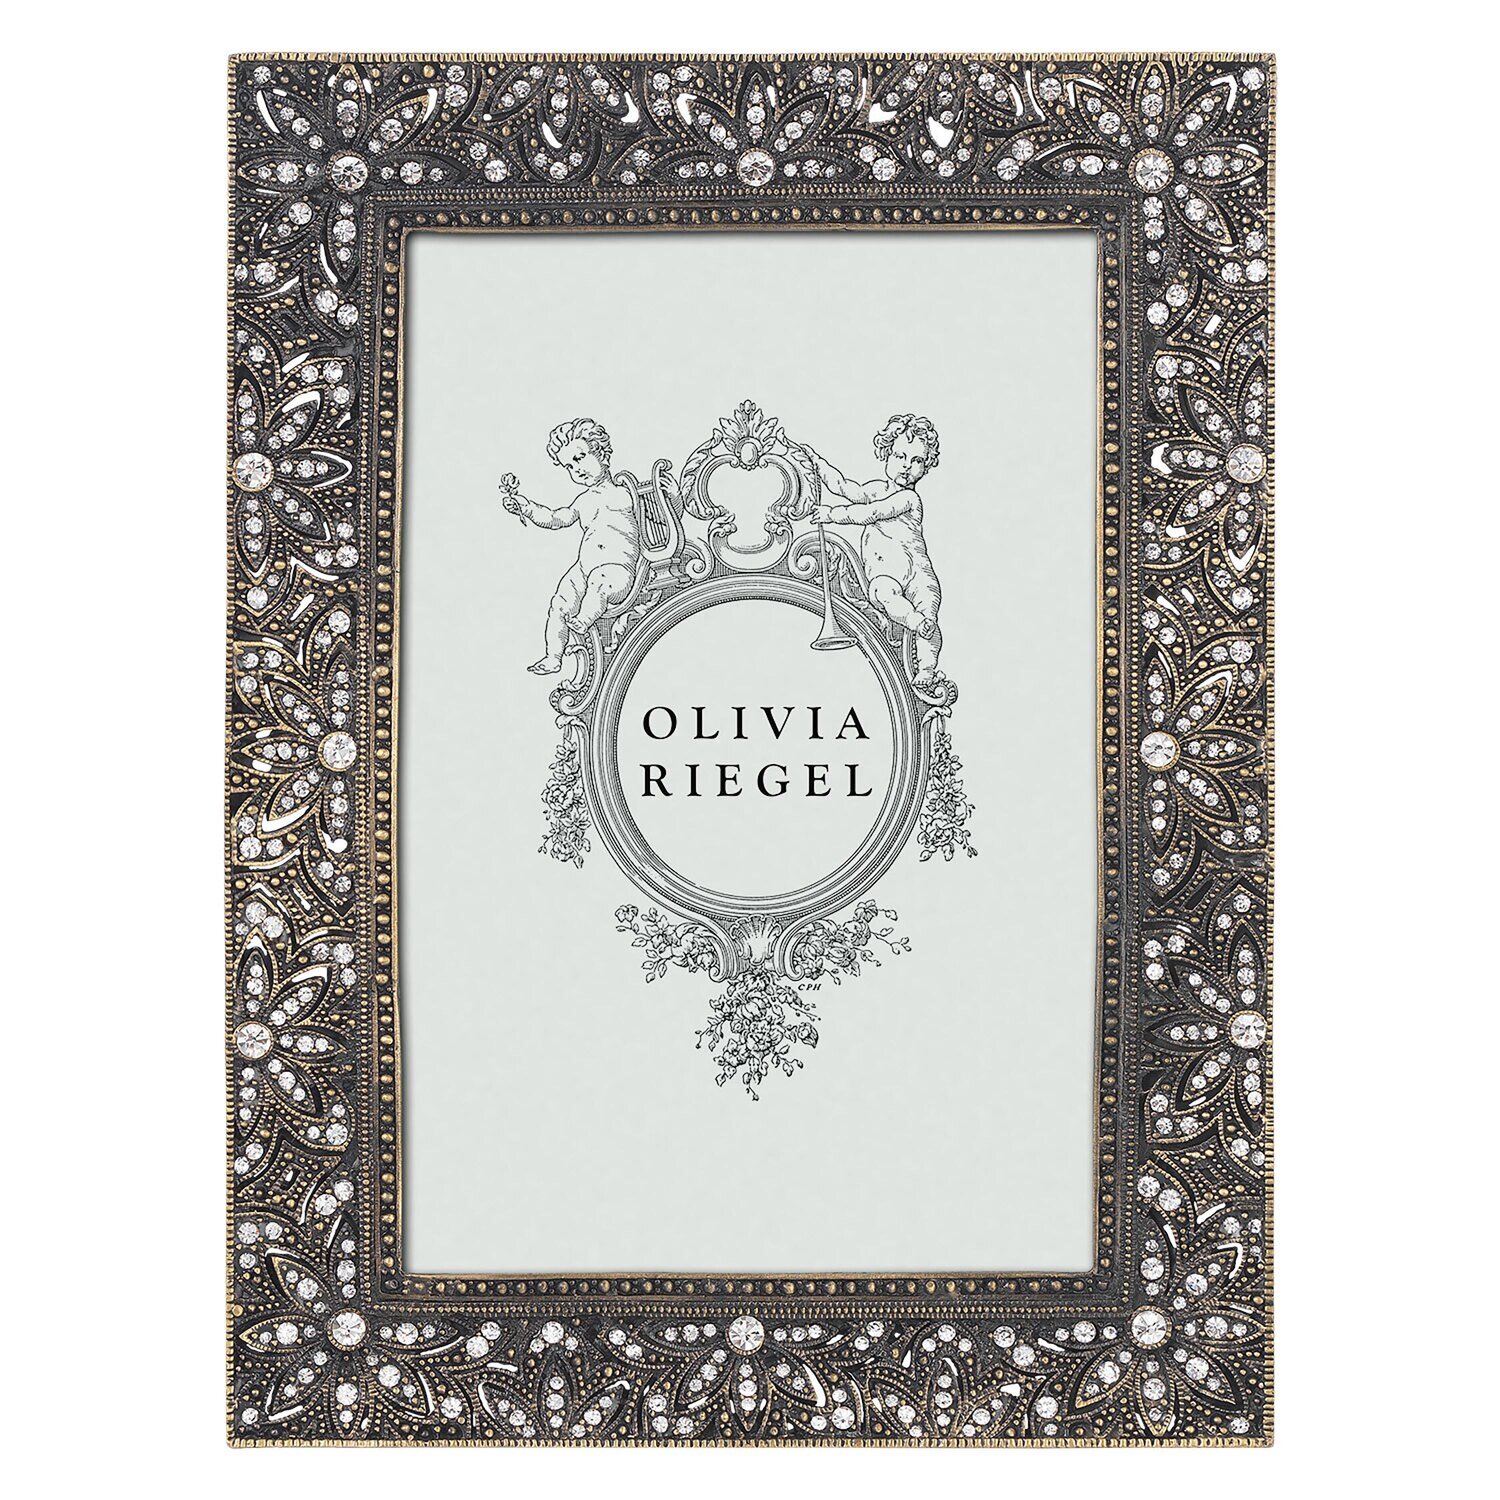 Olivia Riegel Bronze Windsor 4 x 6 Inch Picture Frame RT4736